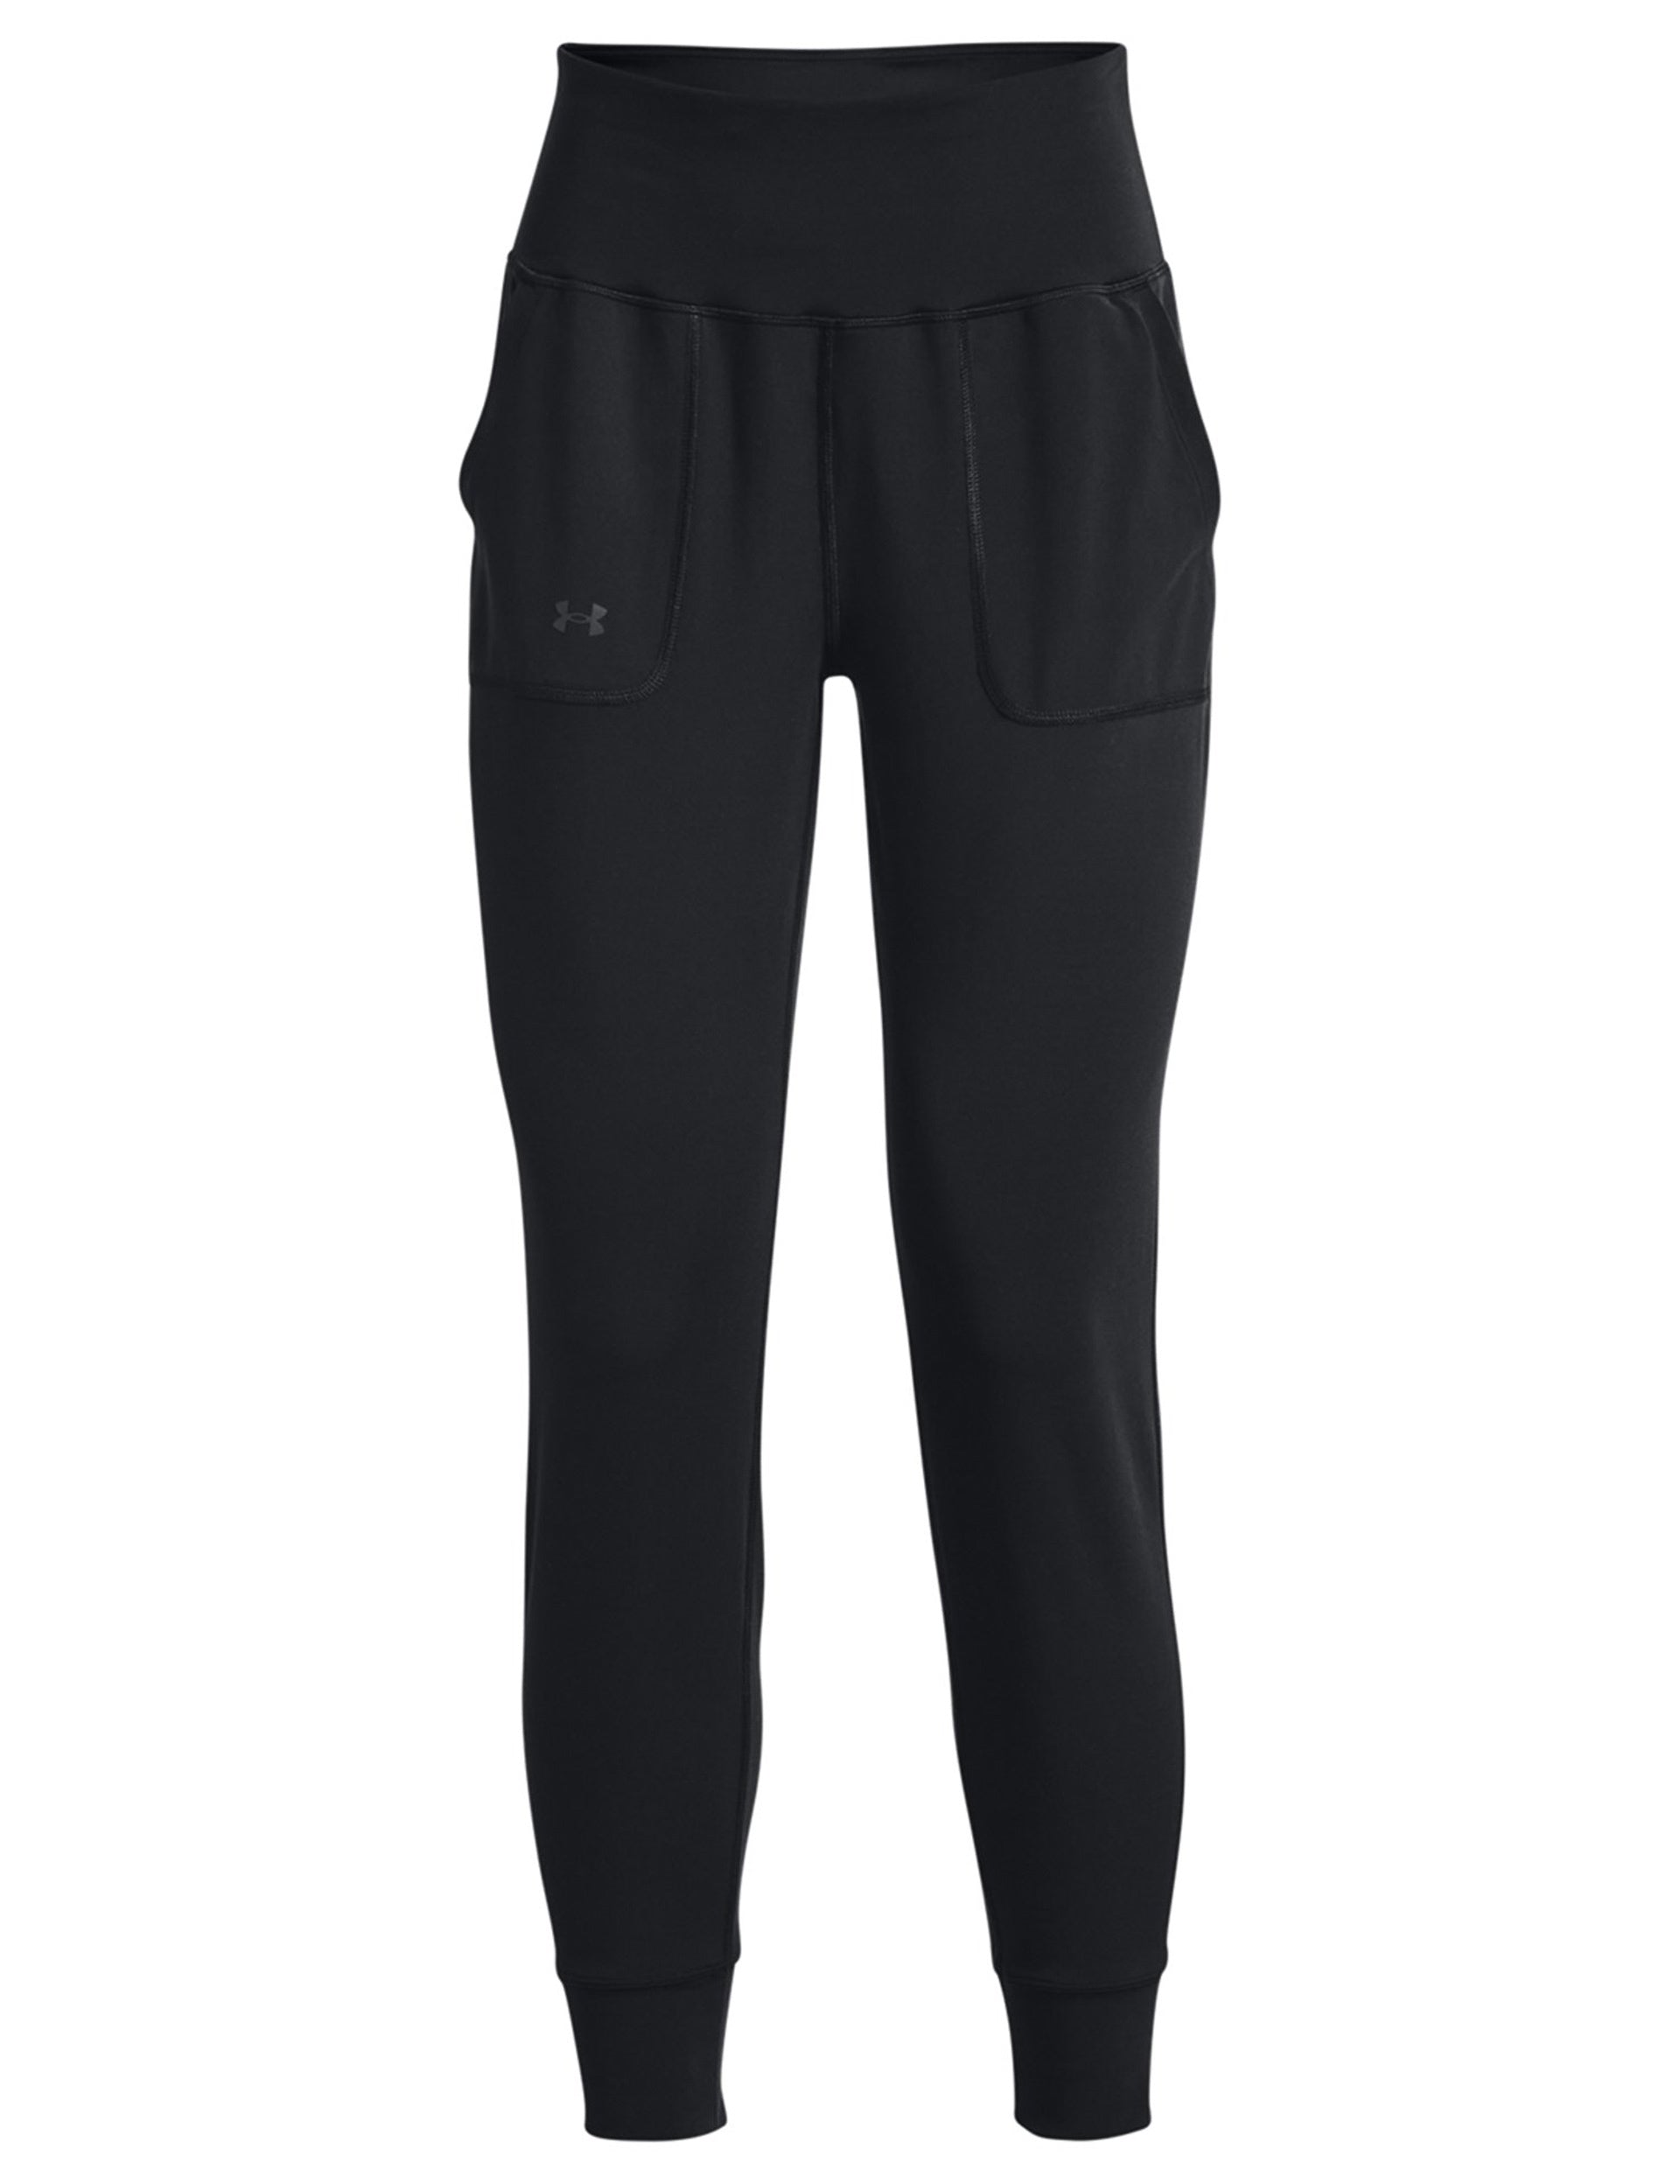 Sports Pants from Under Armour for Women in Gray